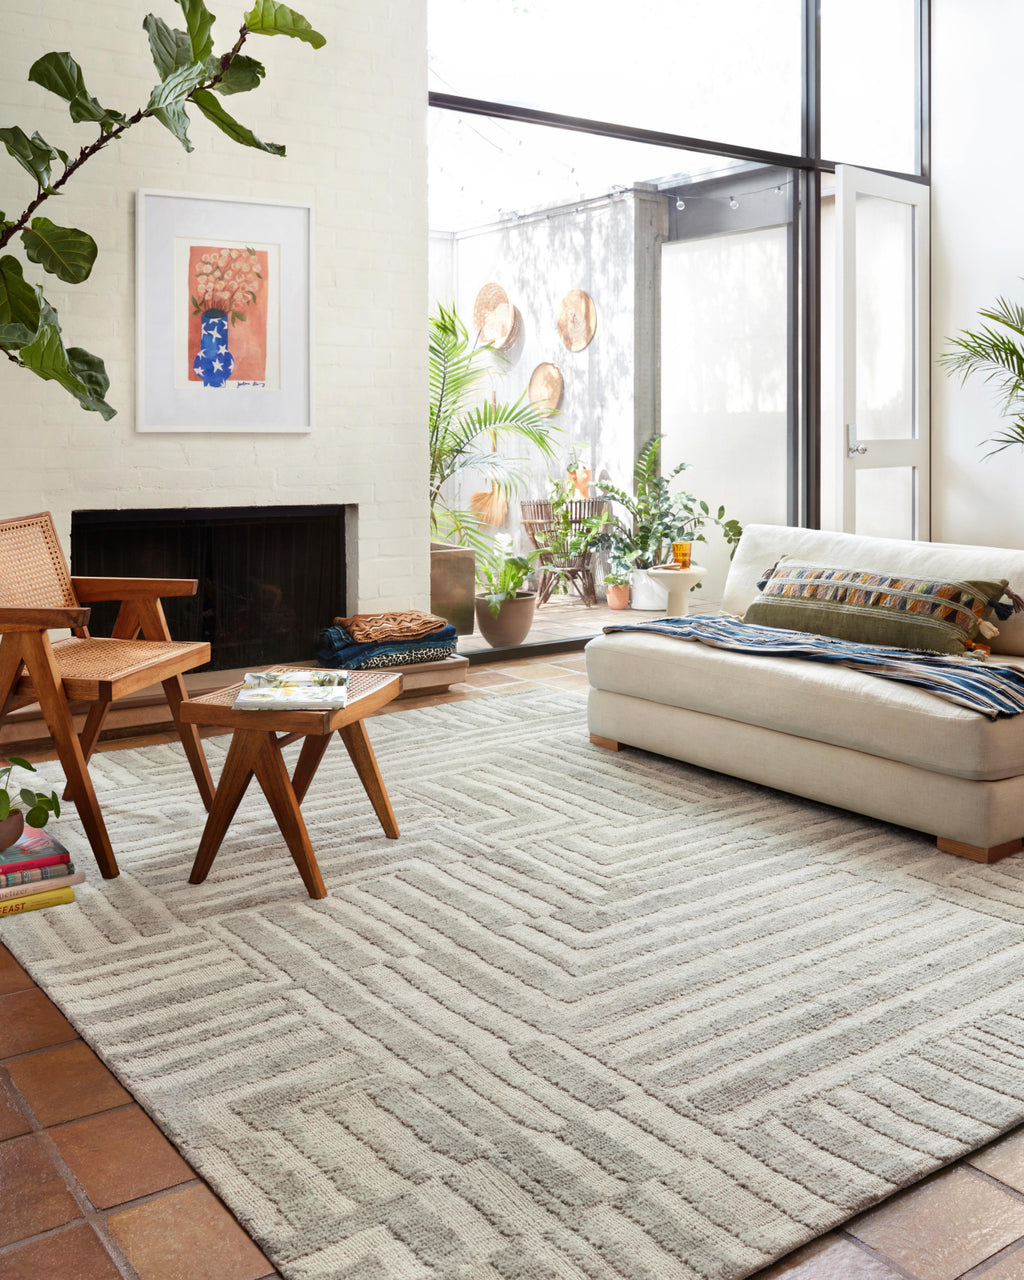 Loloi Yeshaia YES-03 Oatmeal/Silver Area Rug by Justina Blakeney Lifestyle Image Feature